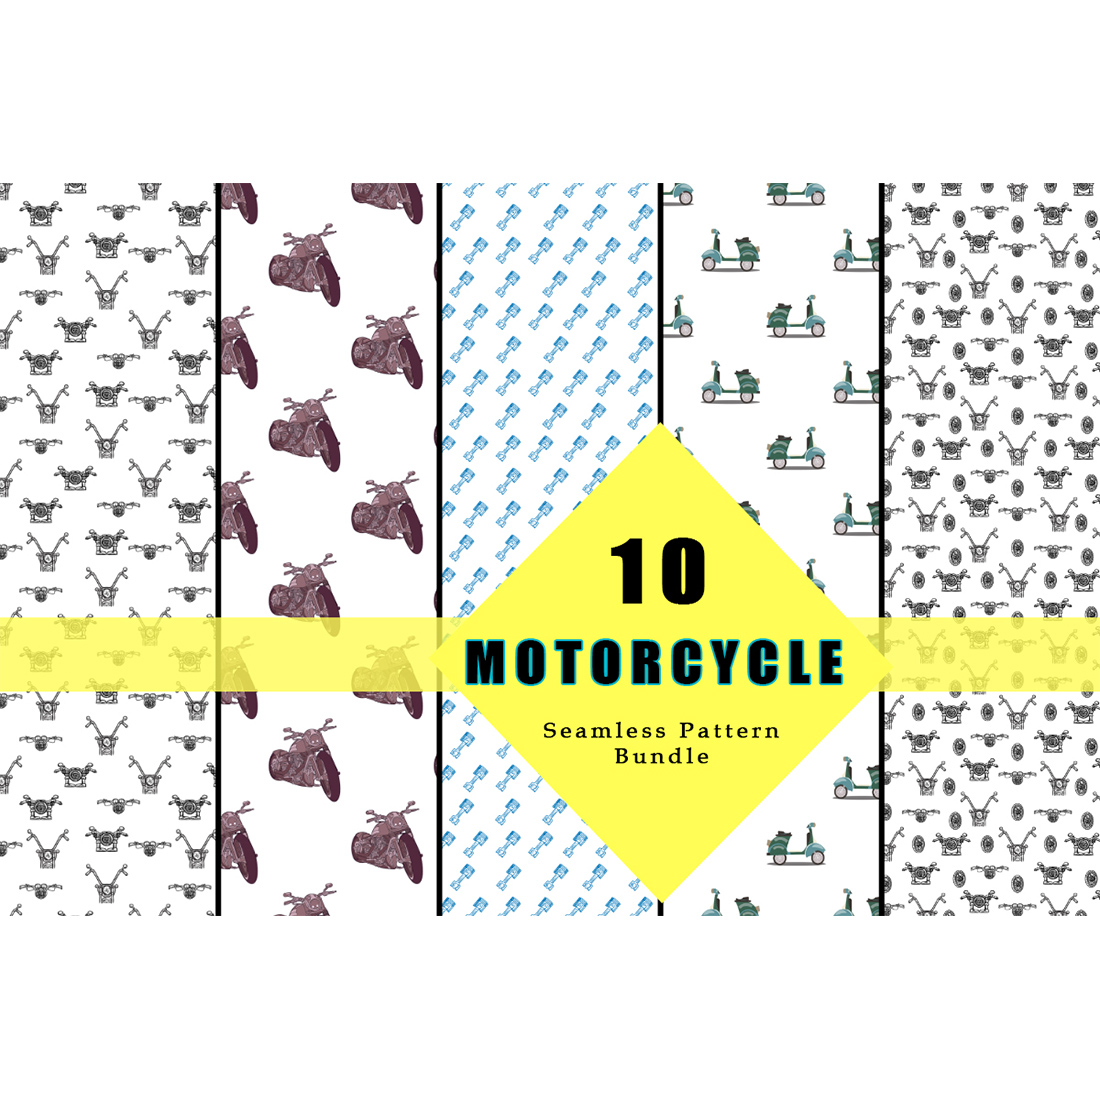 Collection of images of charming patterns with motorcycles